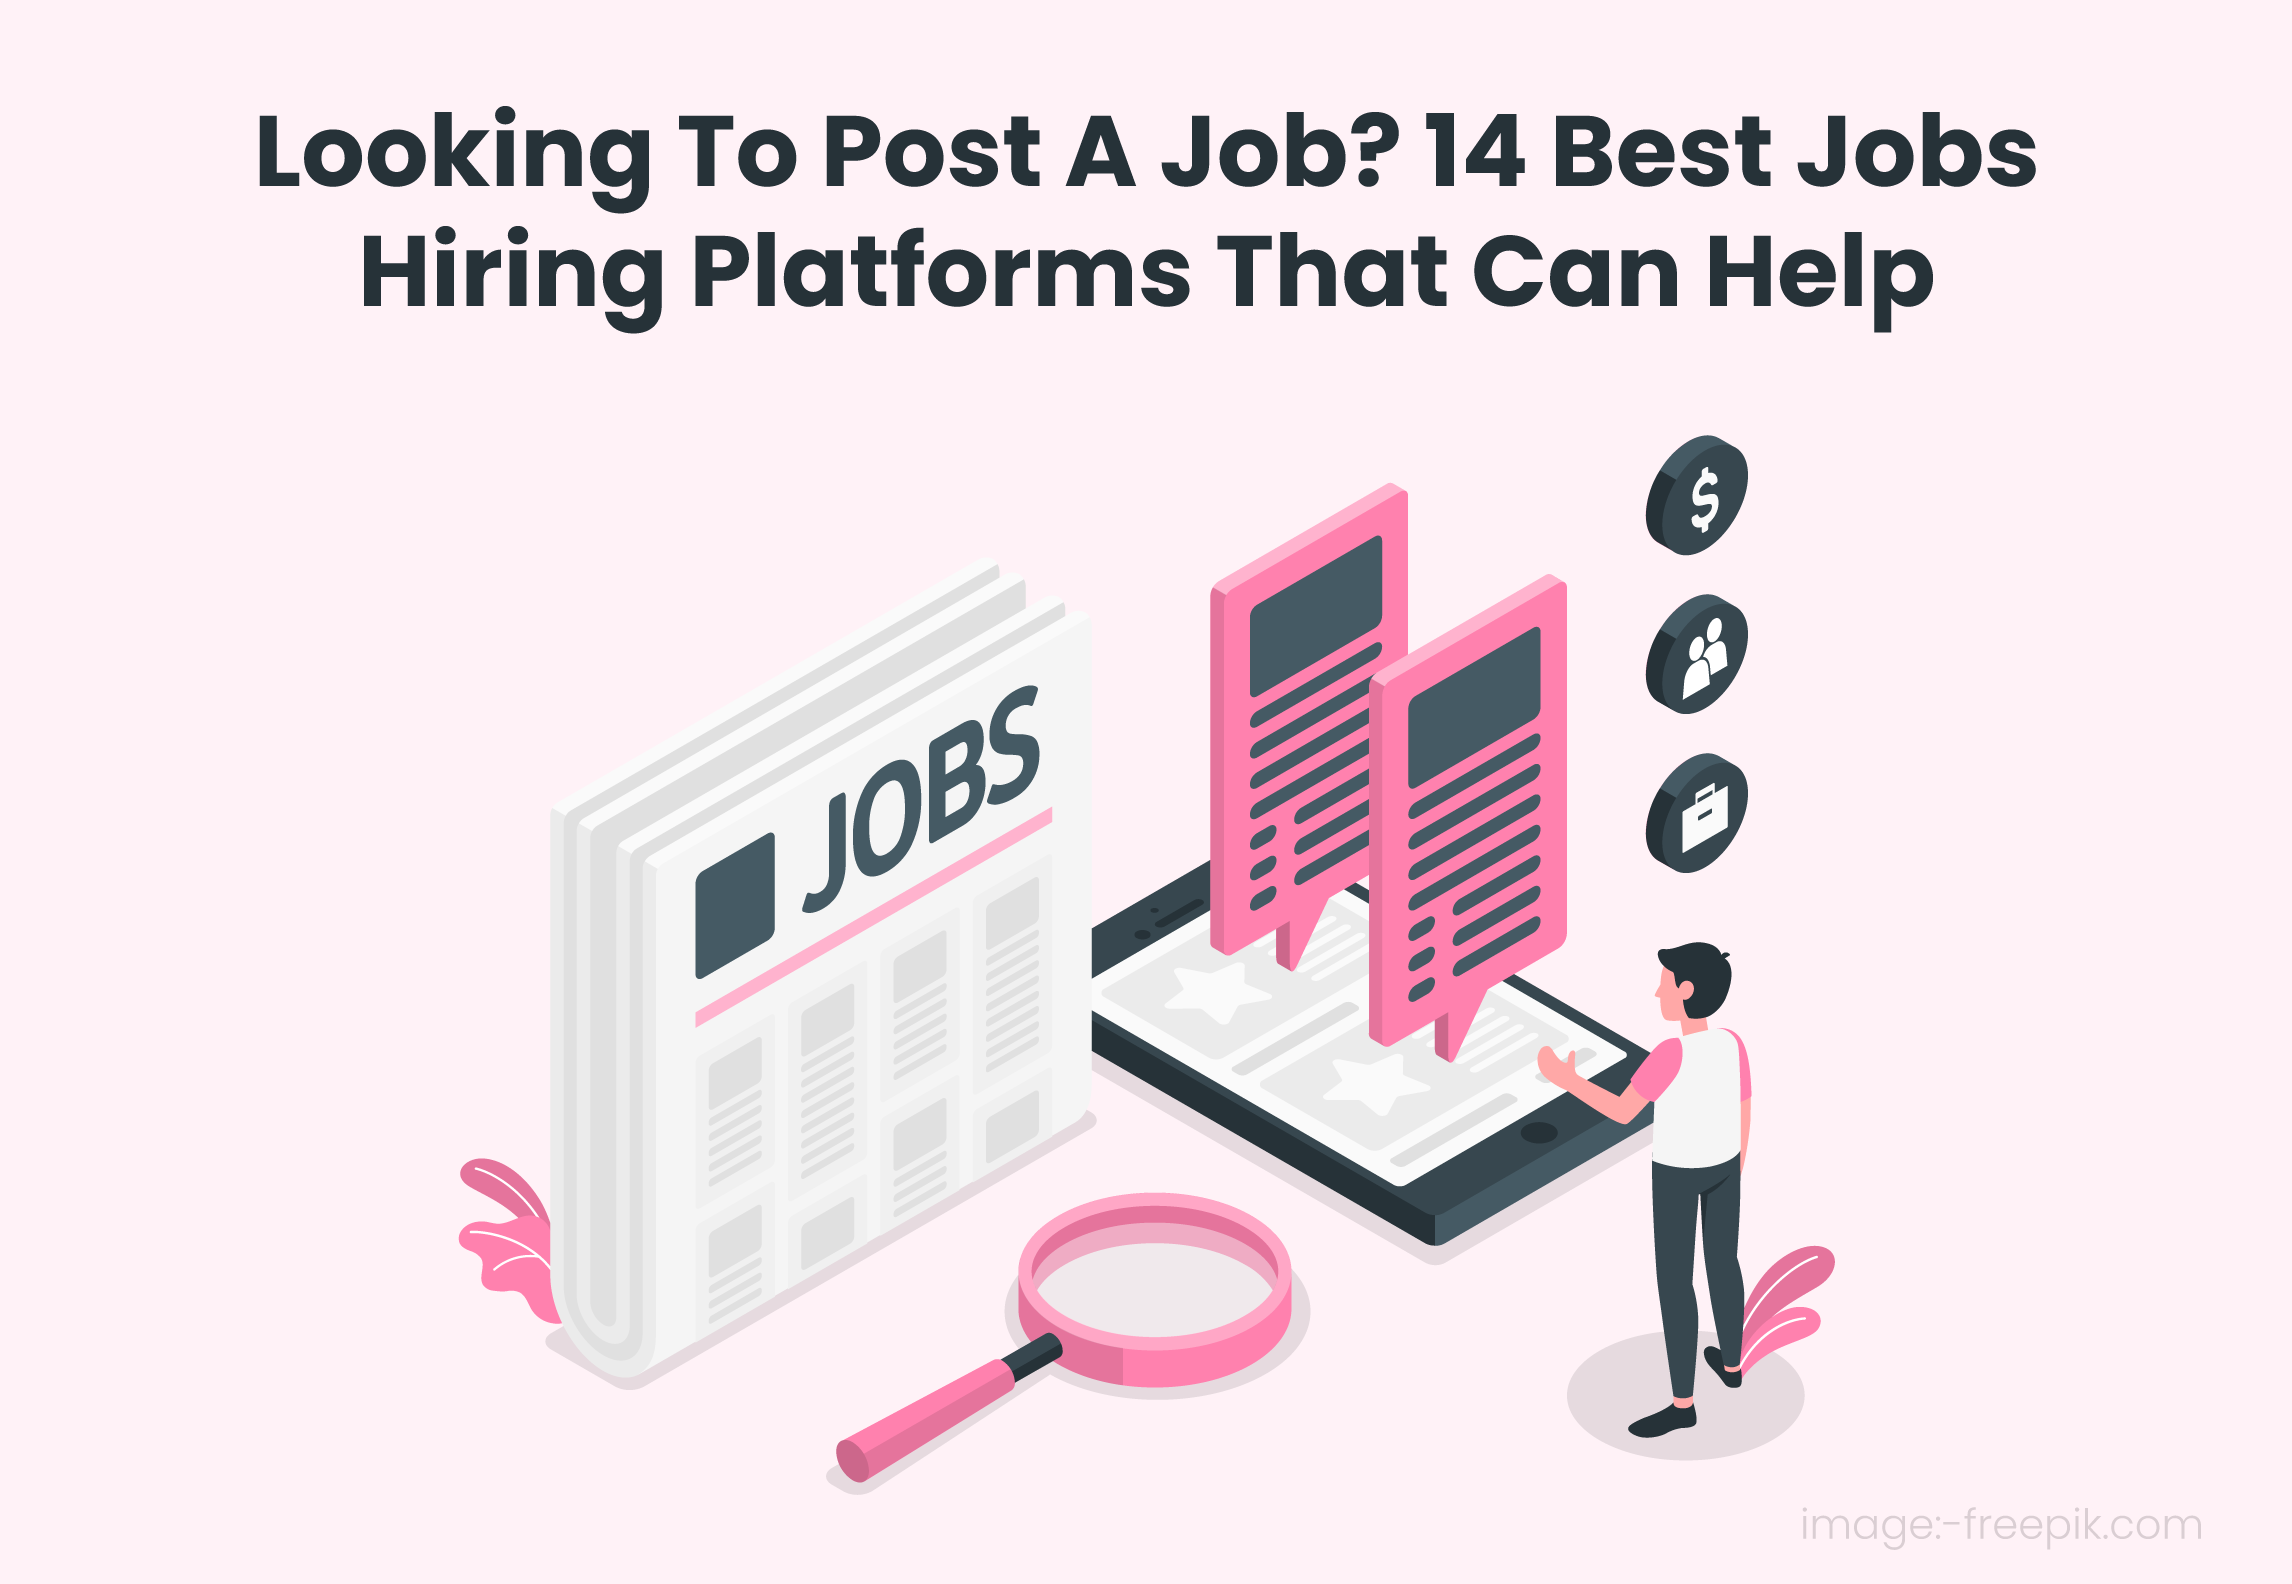 Looking-To-Post-A-Job-14-Best-Jobs-Hiring-Platforms-That-Can-Help